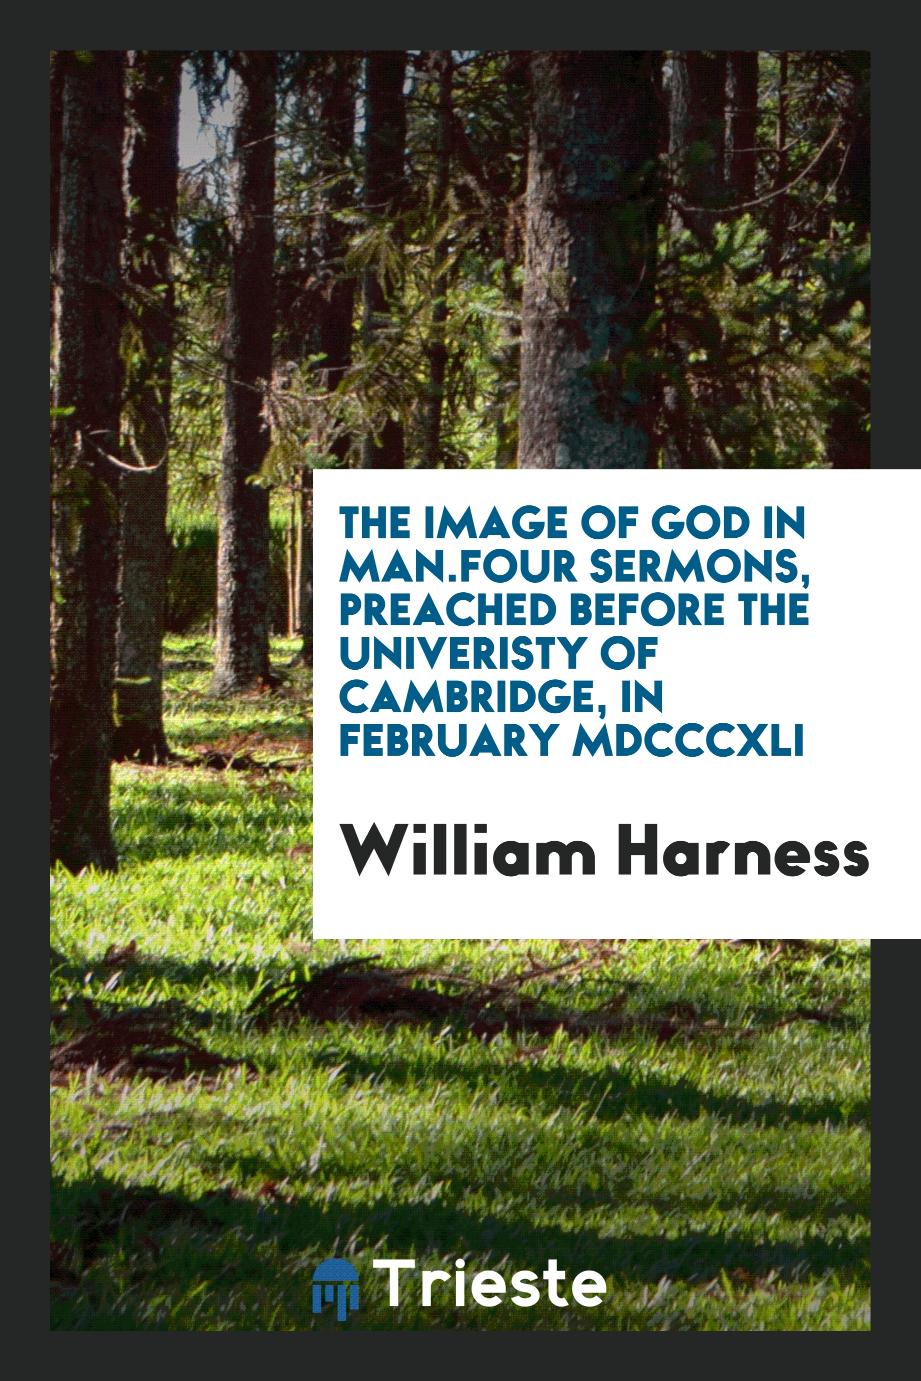 The Image of God in Man.Four Sermons, Preached Before the Univeristy of Cambridge, in February MDCCCXLI